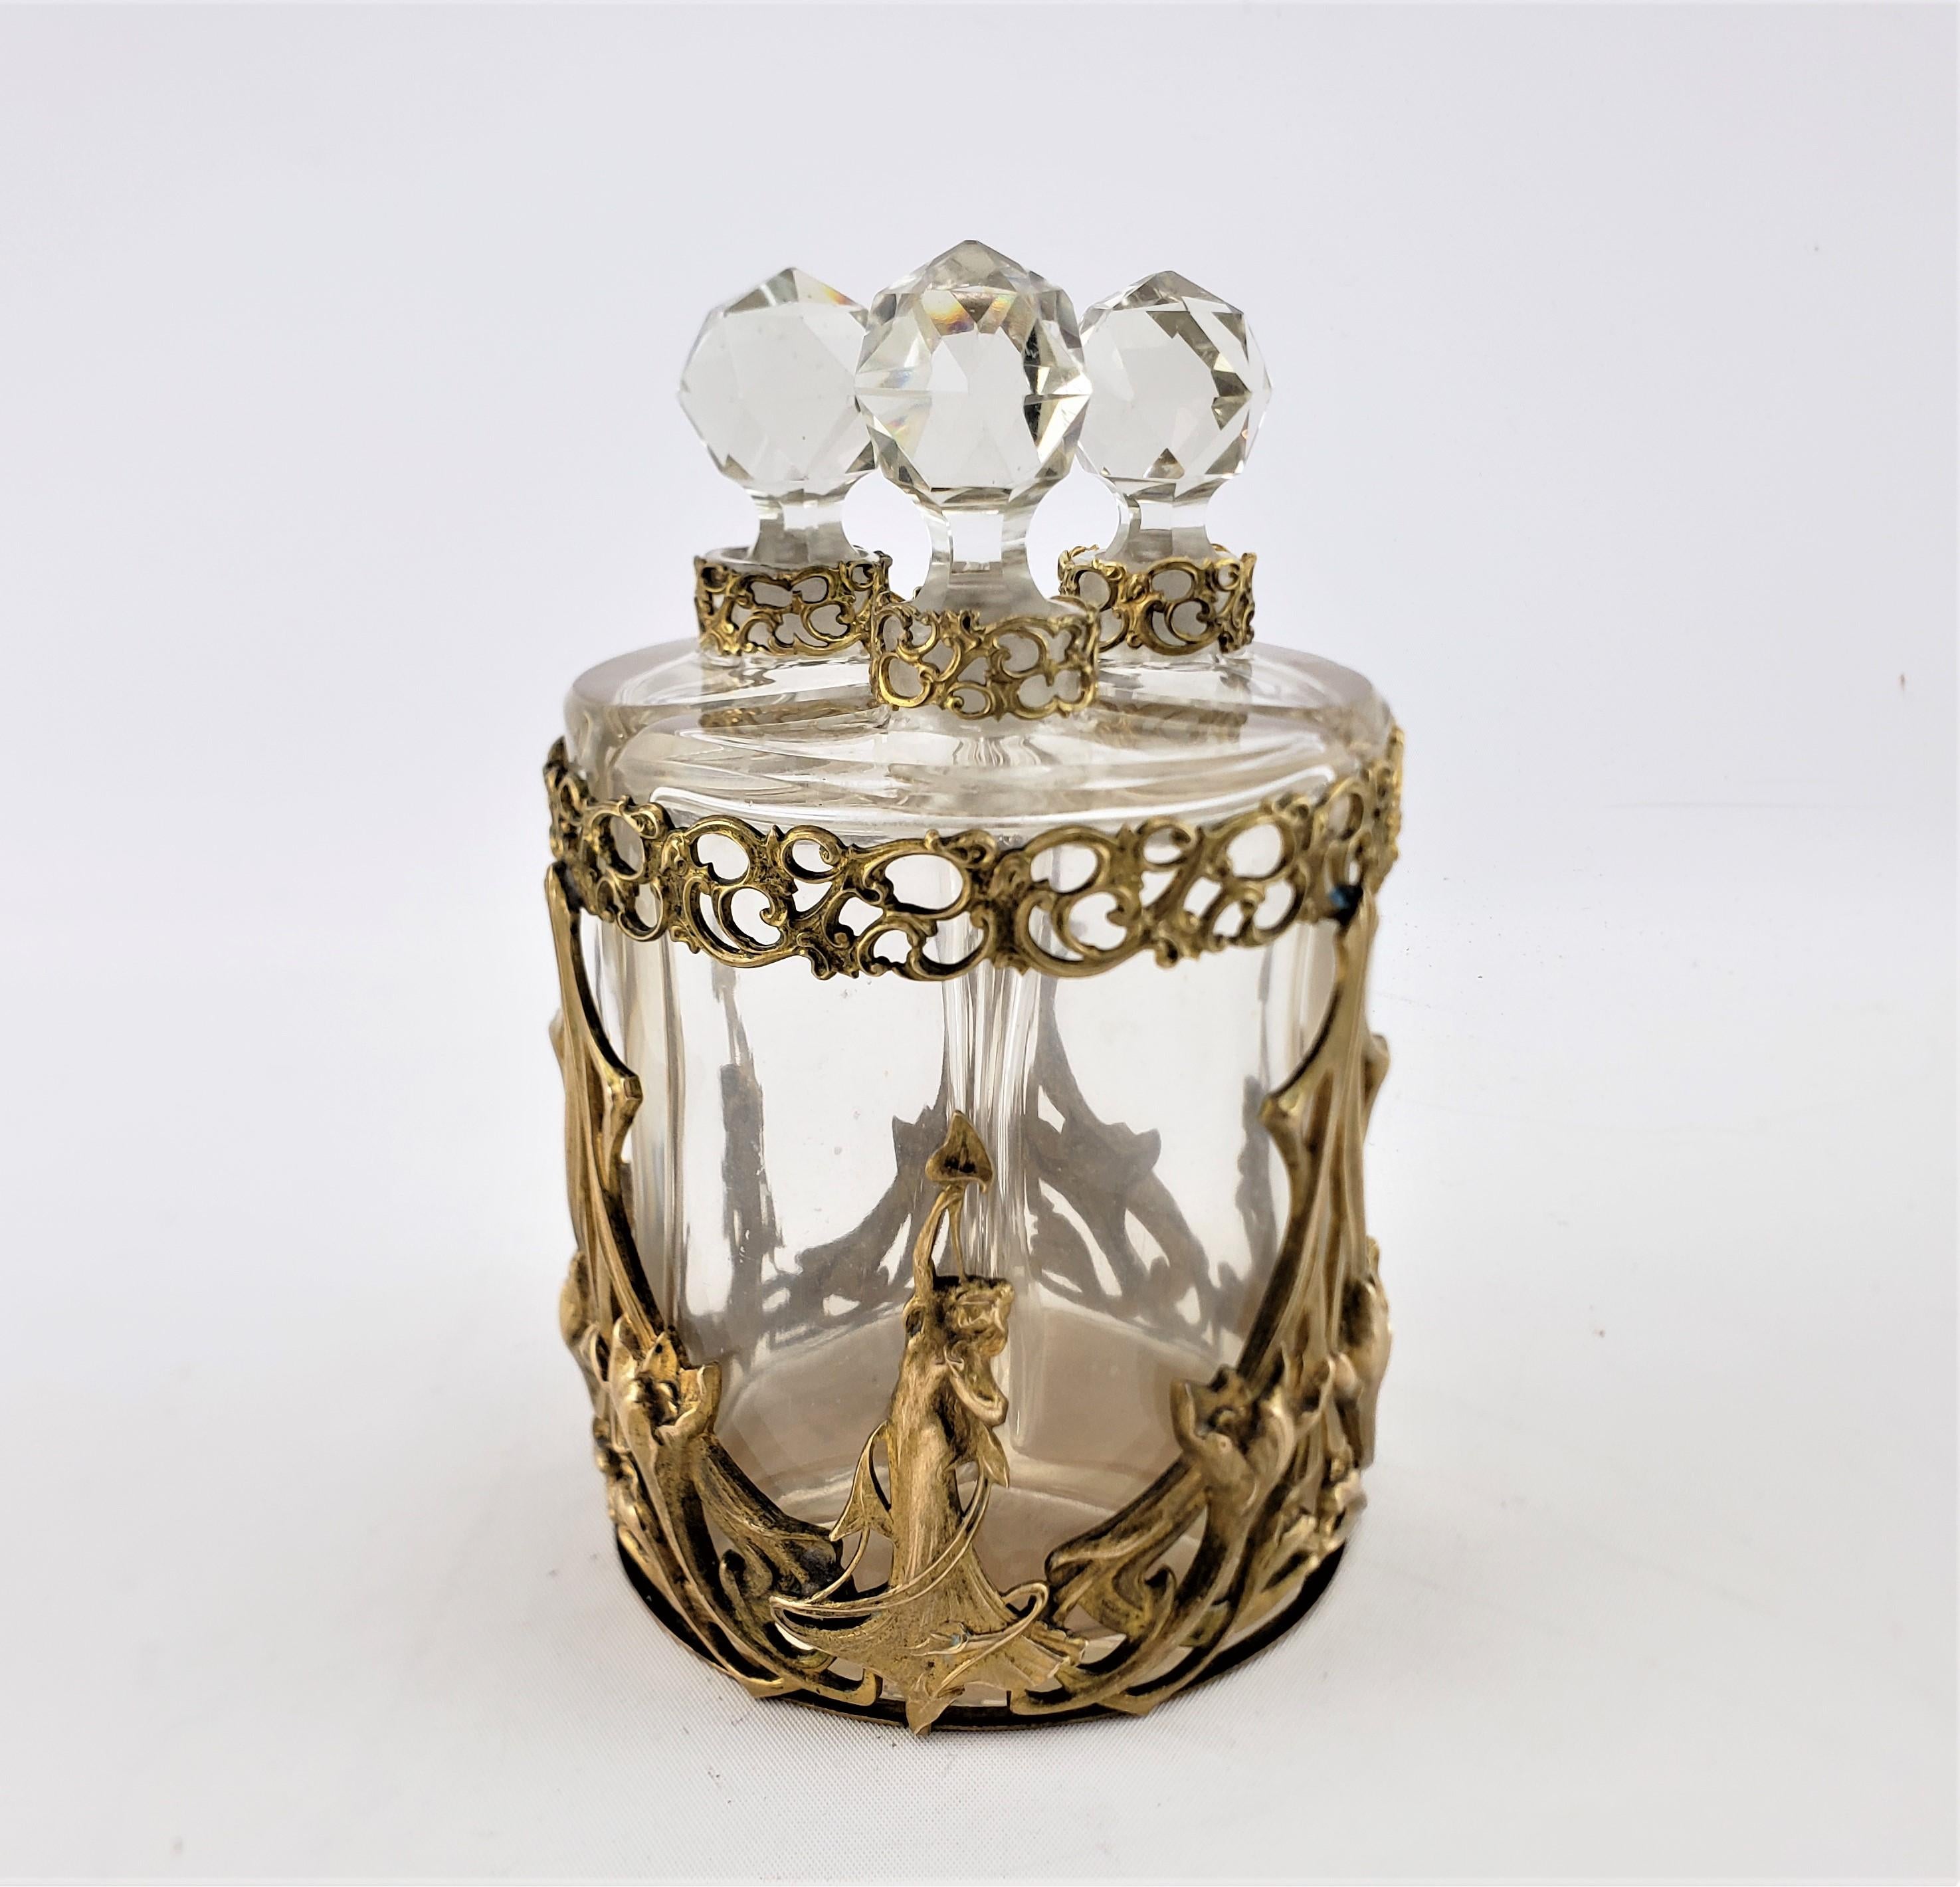 This antique perfume bottle set is unsigned, but presumed to originate from France and date to approximately 1900 and done in the period Art Nouveau style. The set is composed of a found gilt bronze carriage or holder done in cast and gilt bronze